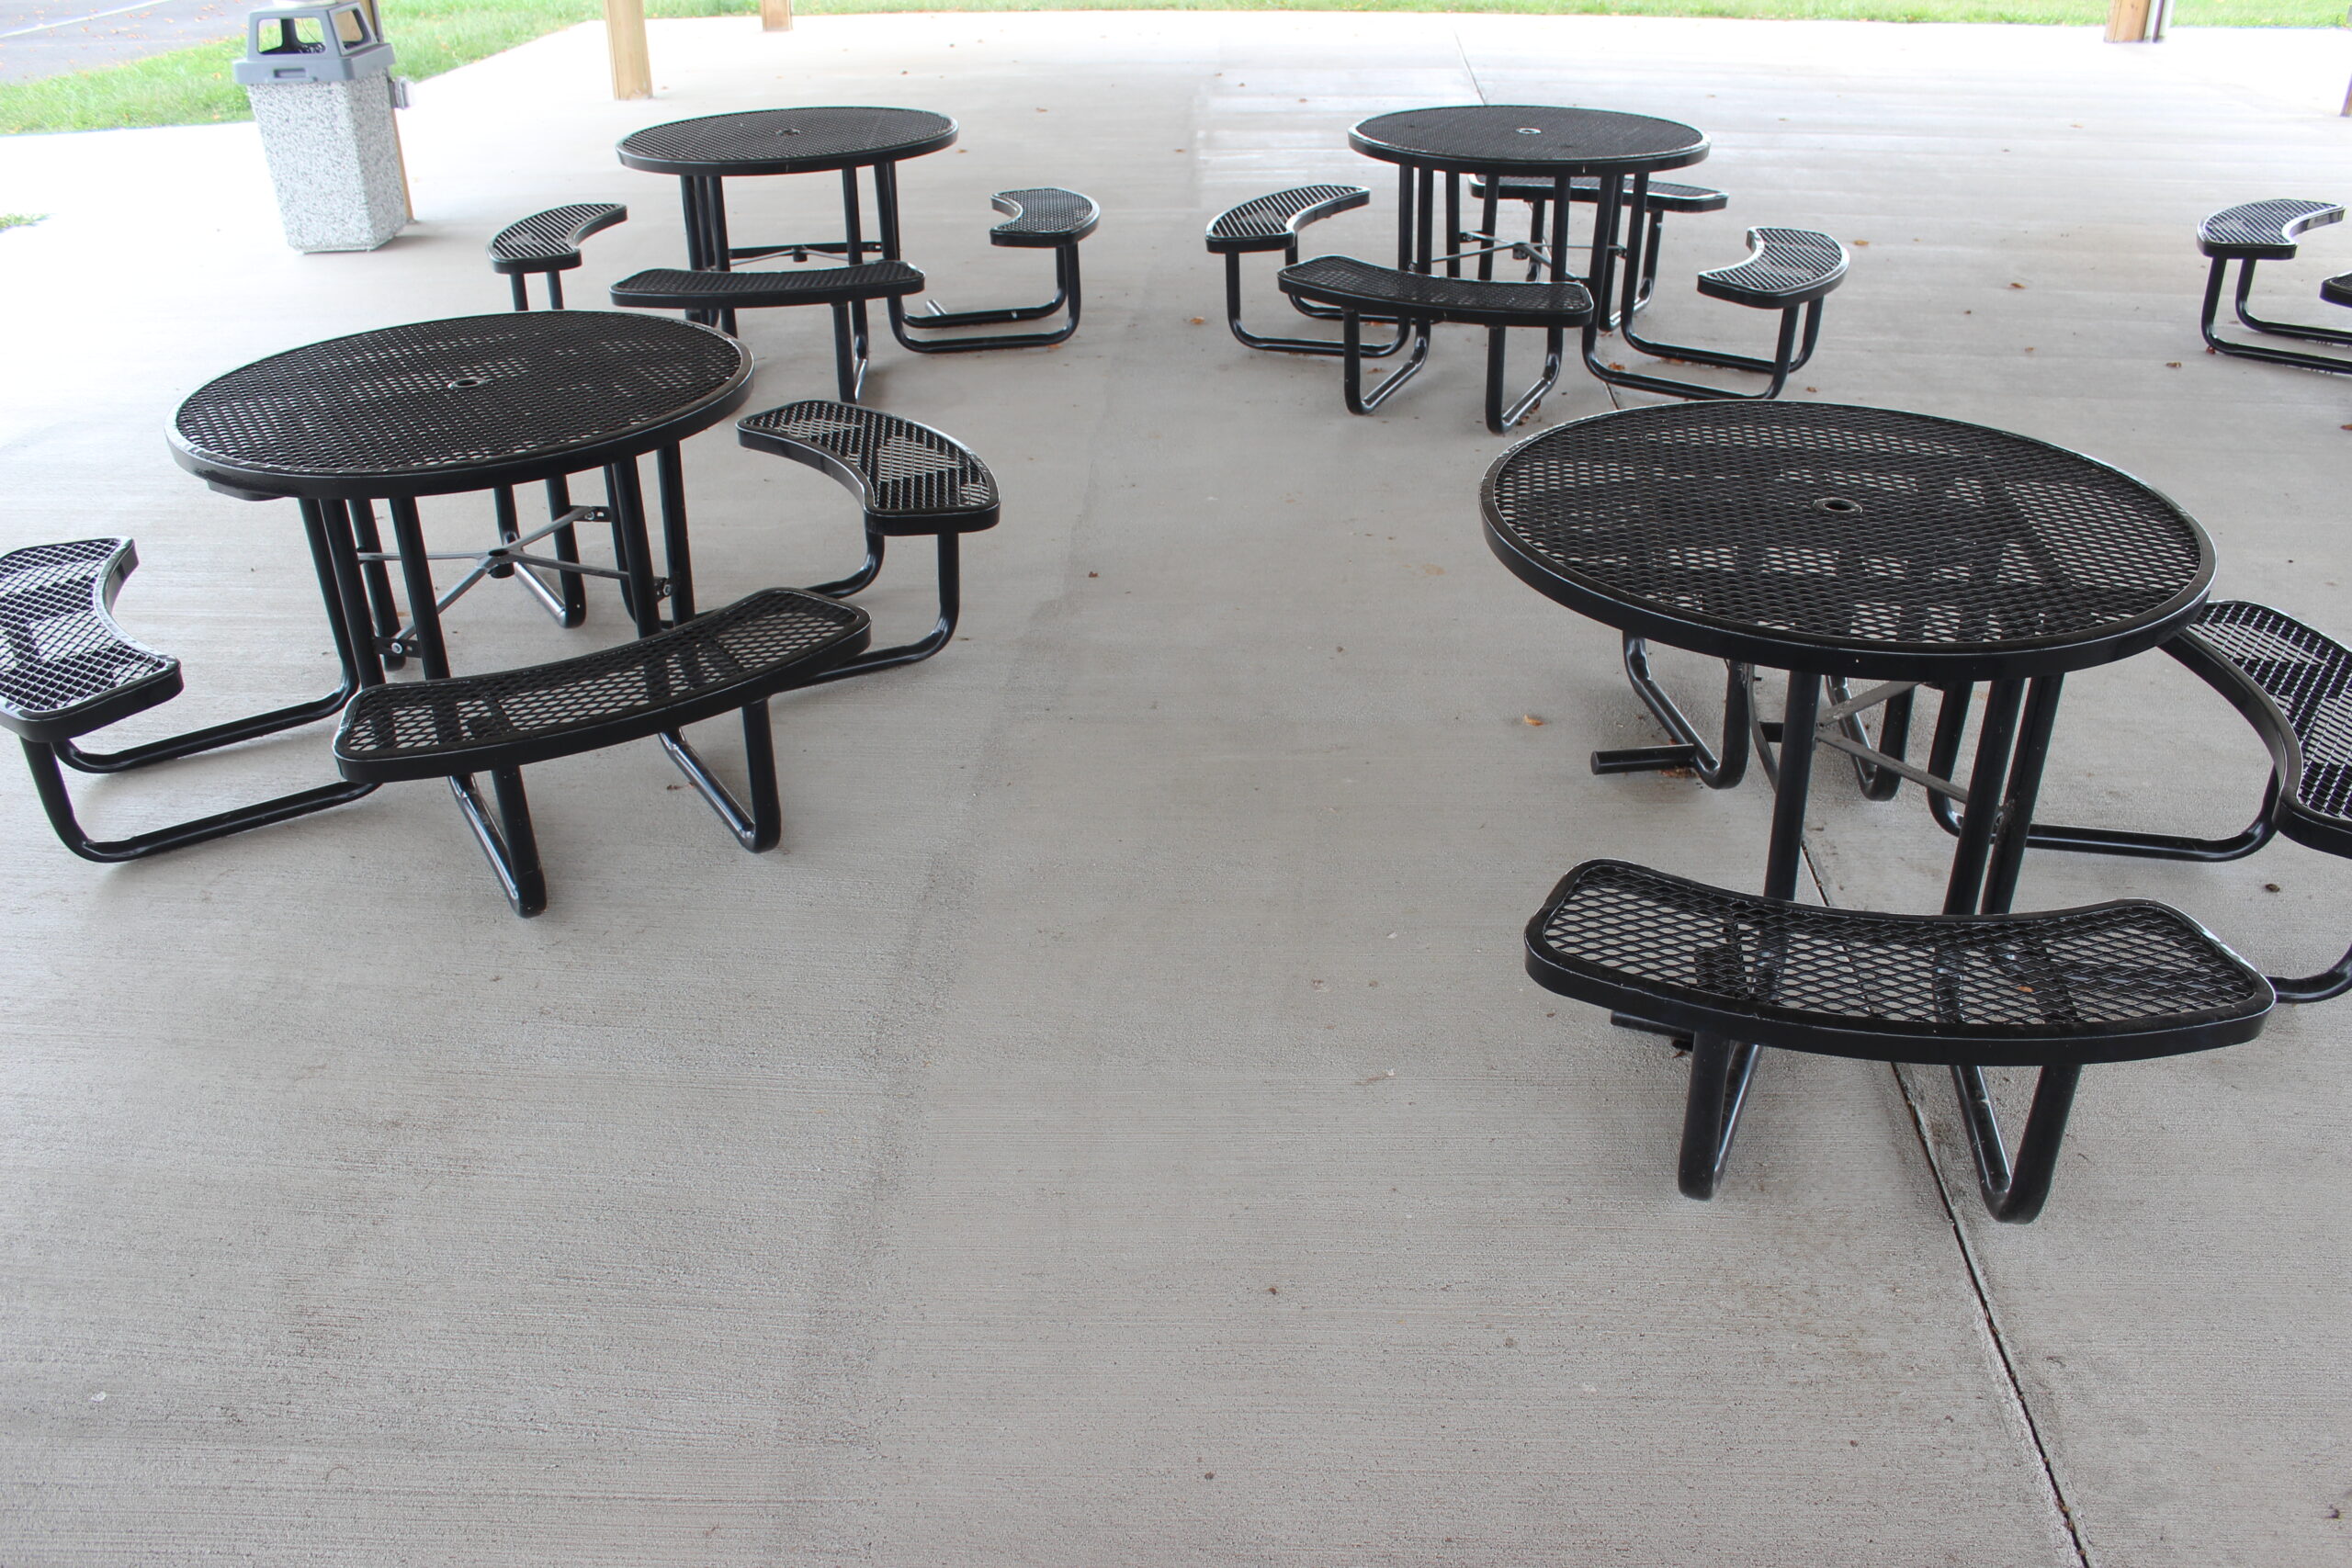 ADA accessible tables are a part of the seating in the pavilion so all may have a seat at the table